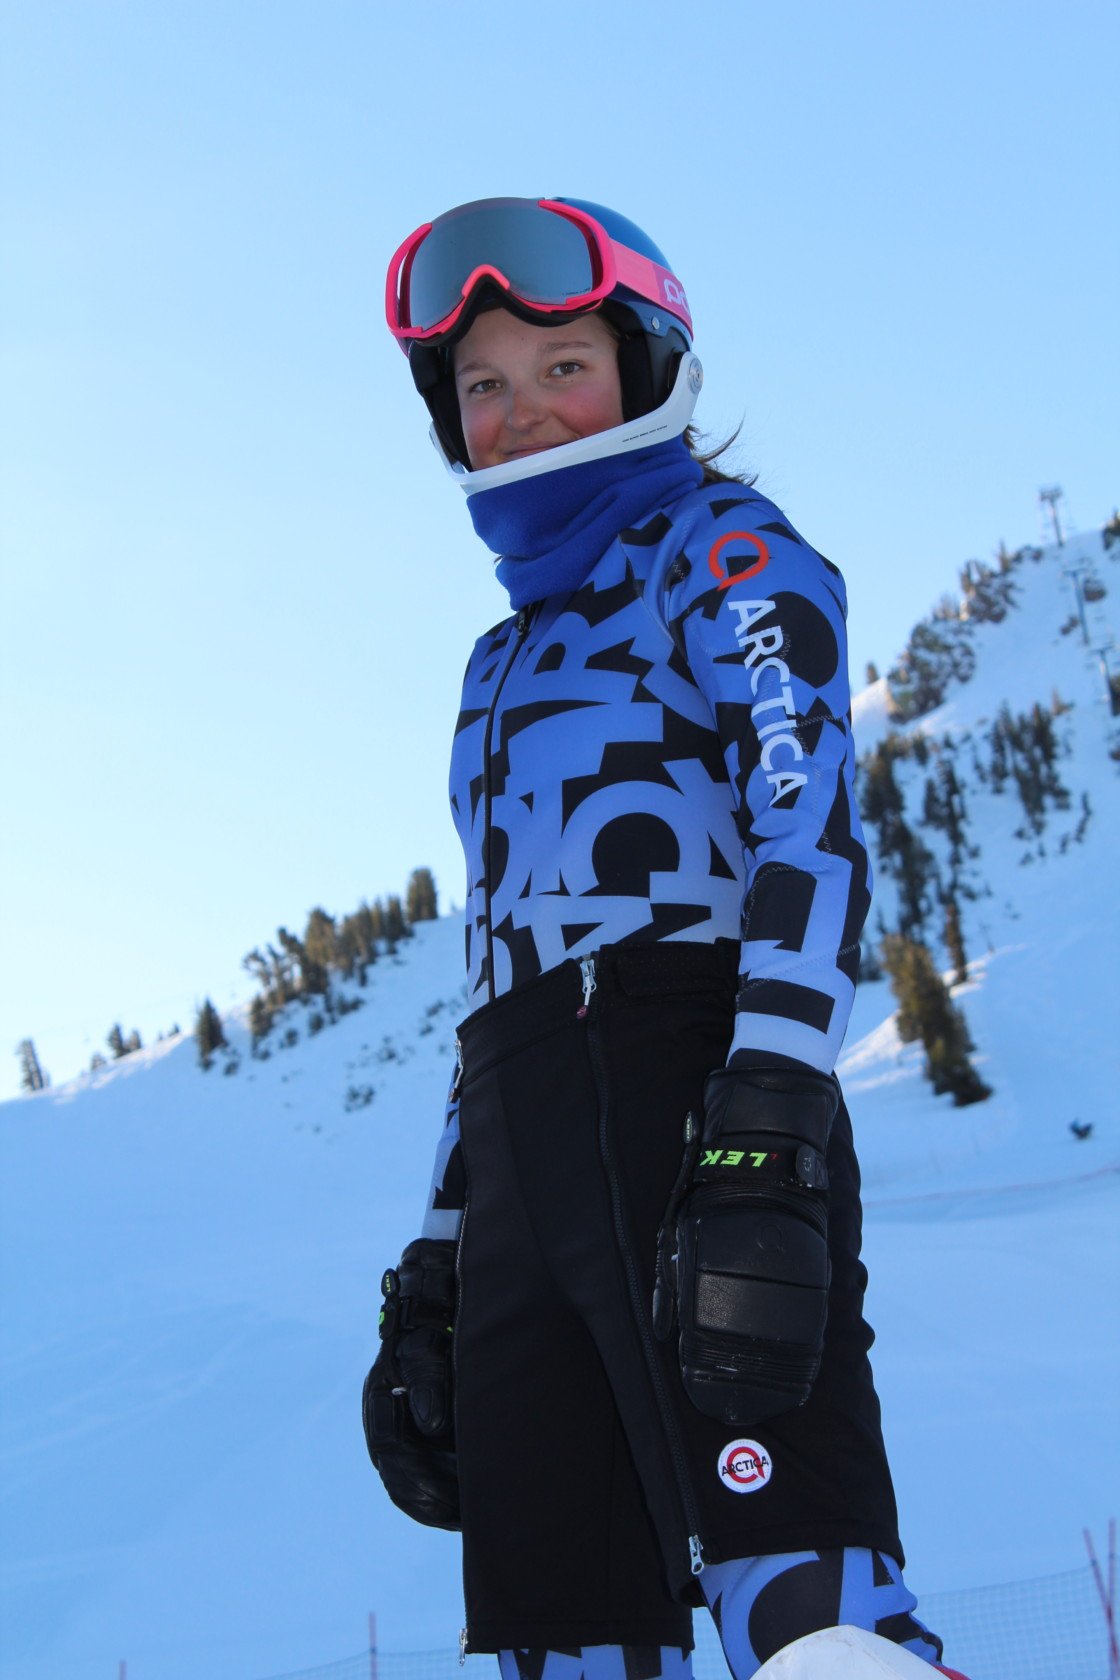 The Arctica Alpha GS Speed Suit in blue is an equally popular ski racing suit for girls and boys.